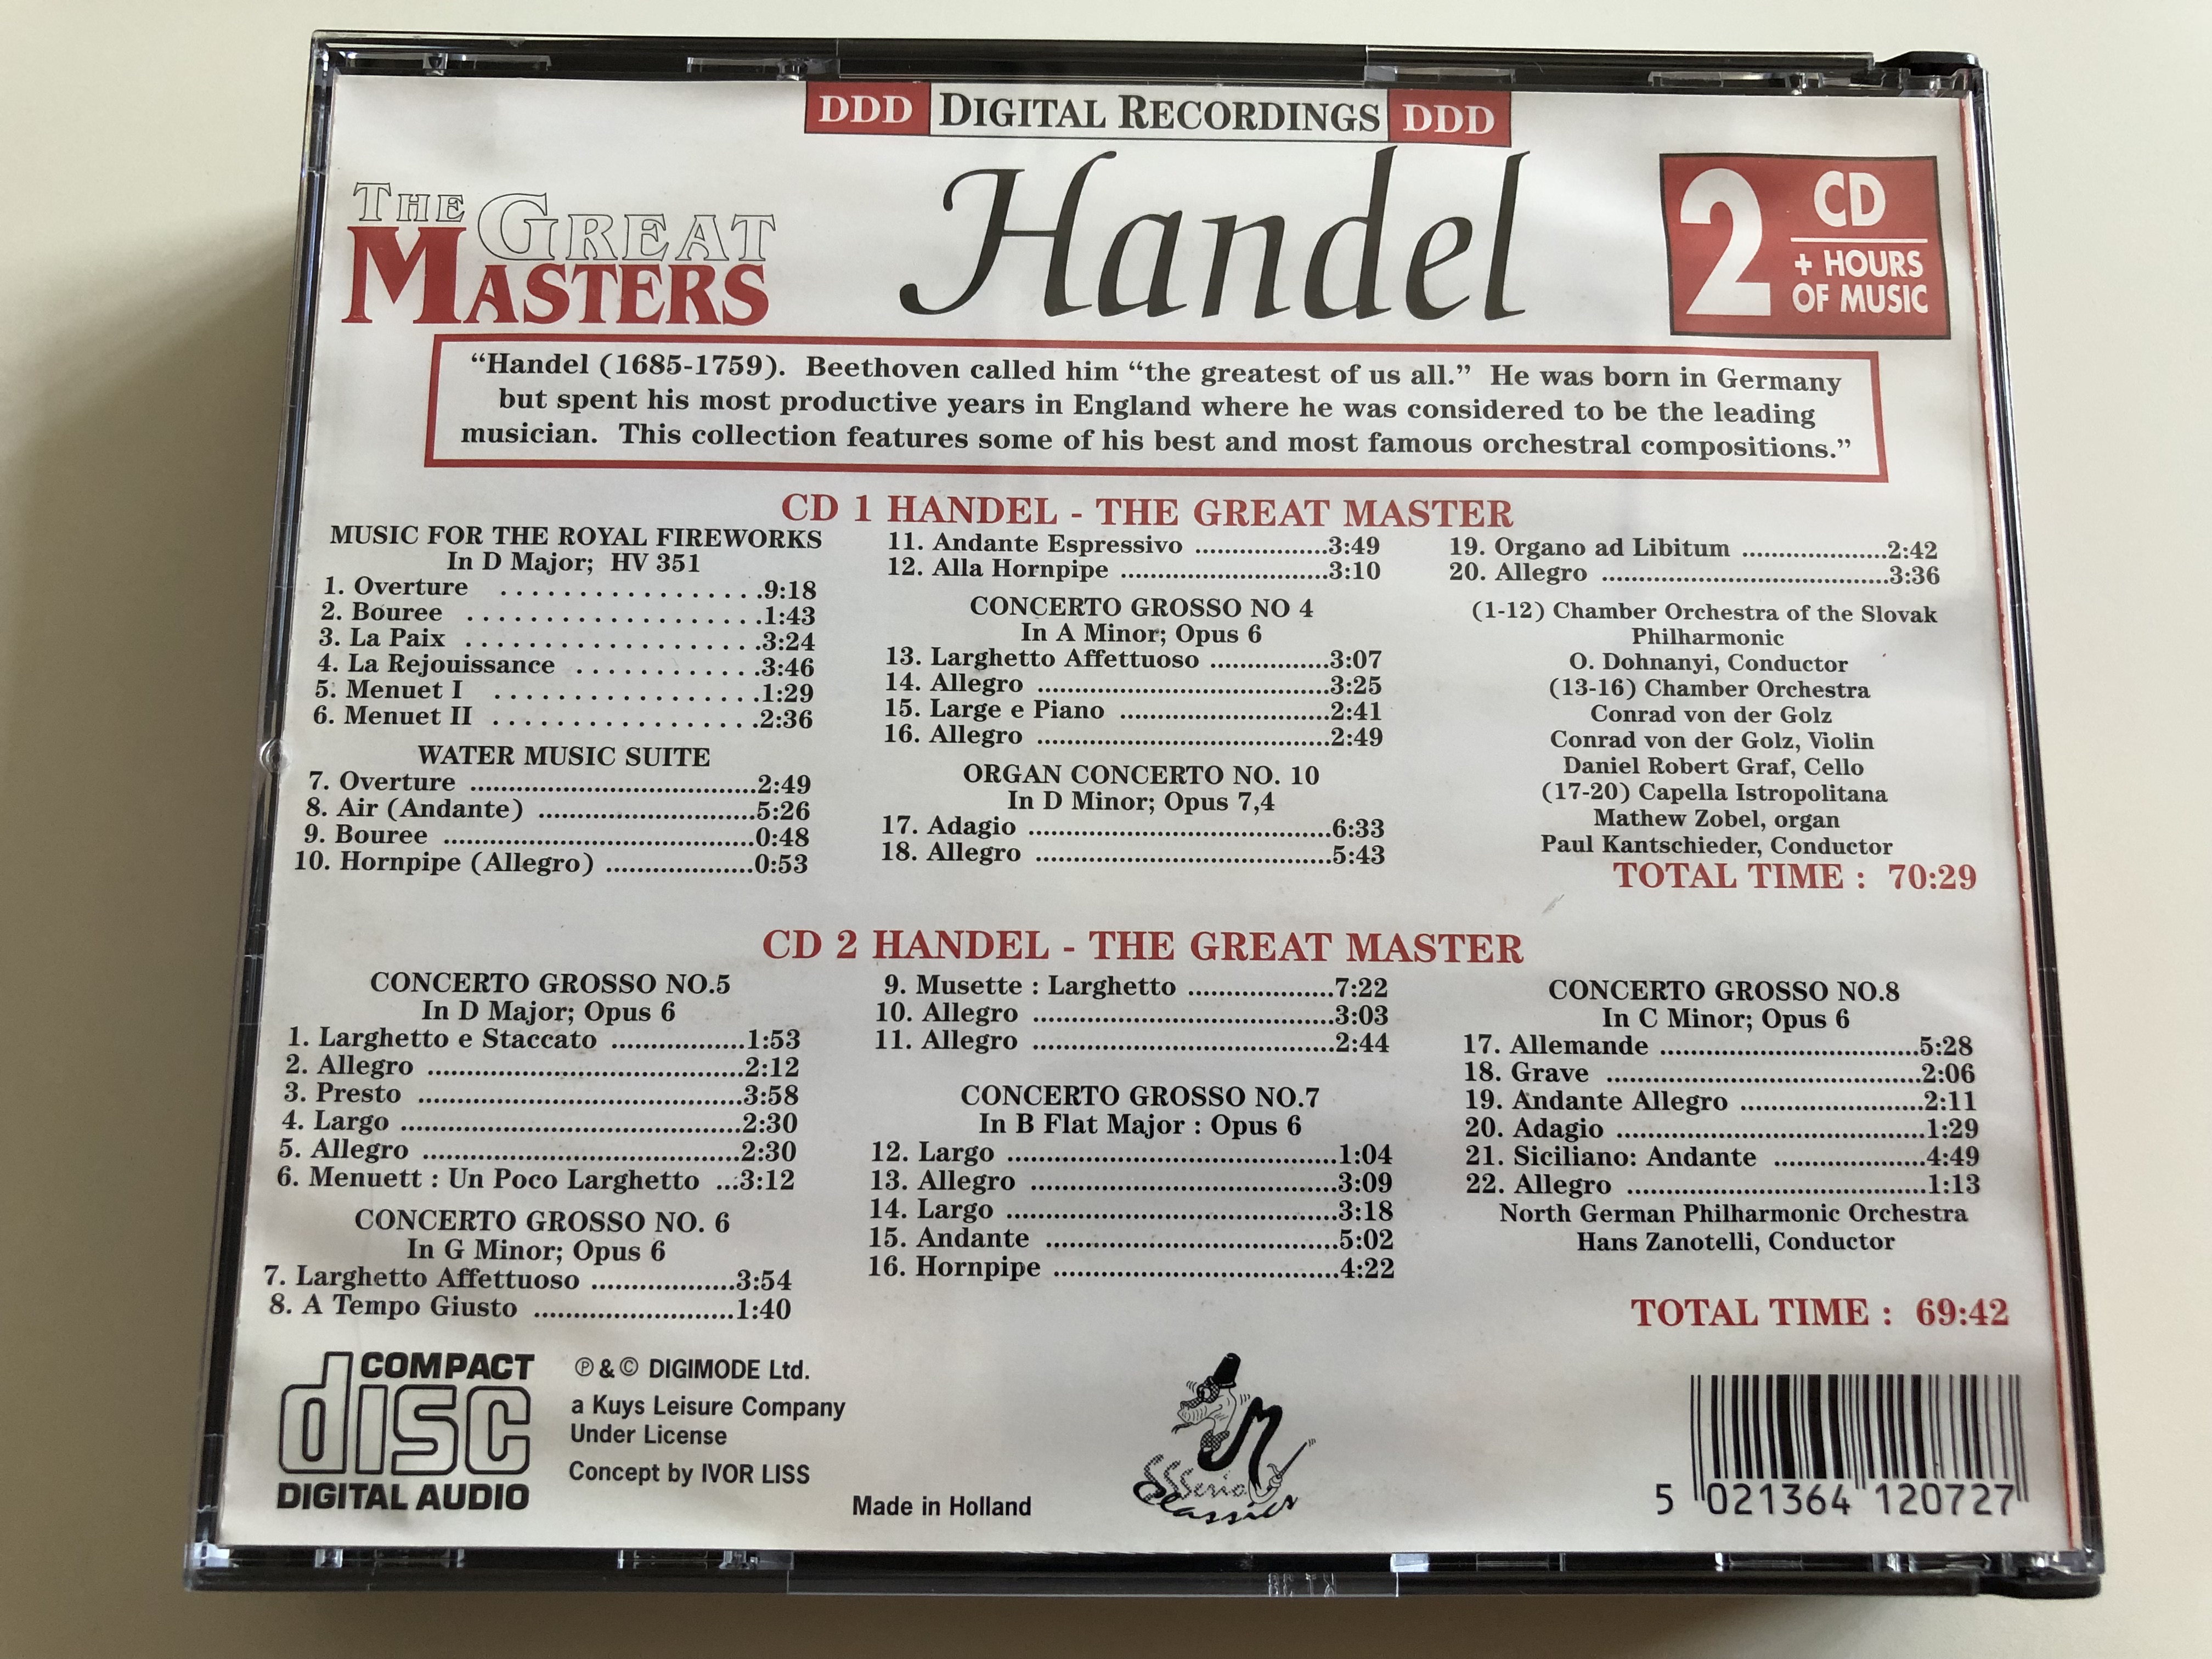 the-great-masters-handel-a-collection-of-his-finest-masterpieces-music-for-the-royal-fireworks-water-music-suite-2-cd-2-hours-of-music-sp-12072-5-.jpg